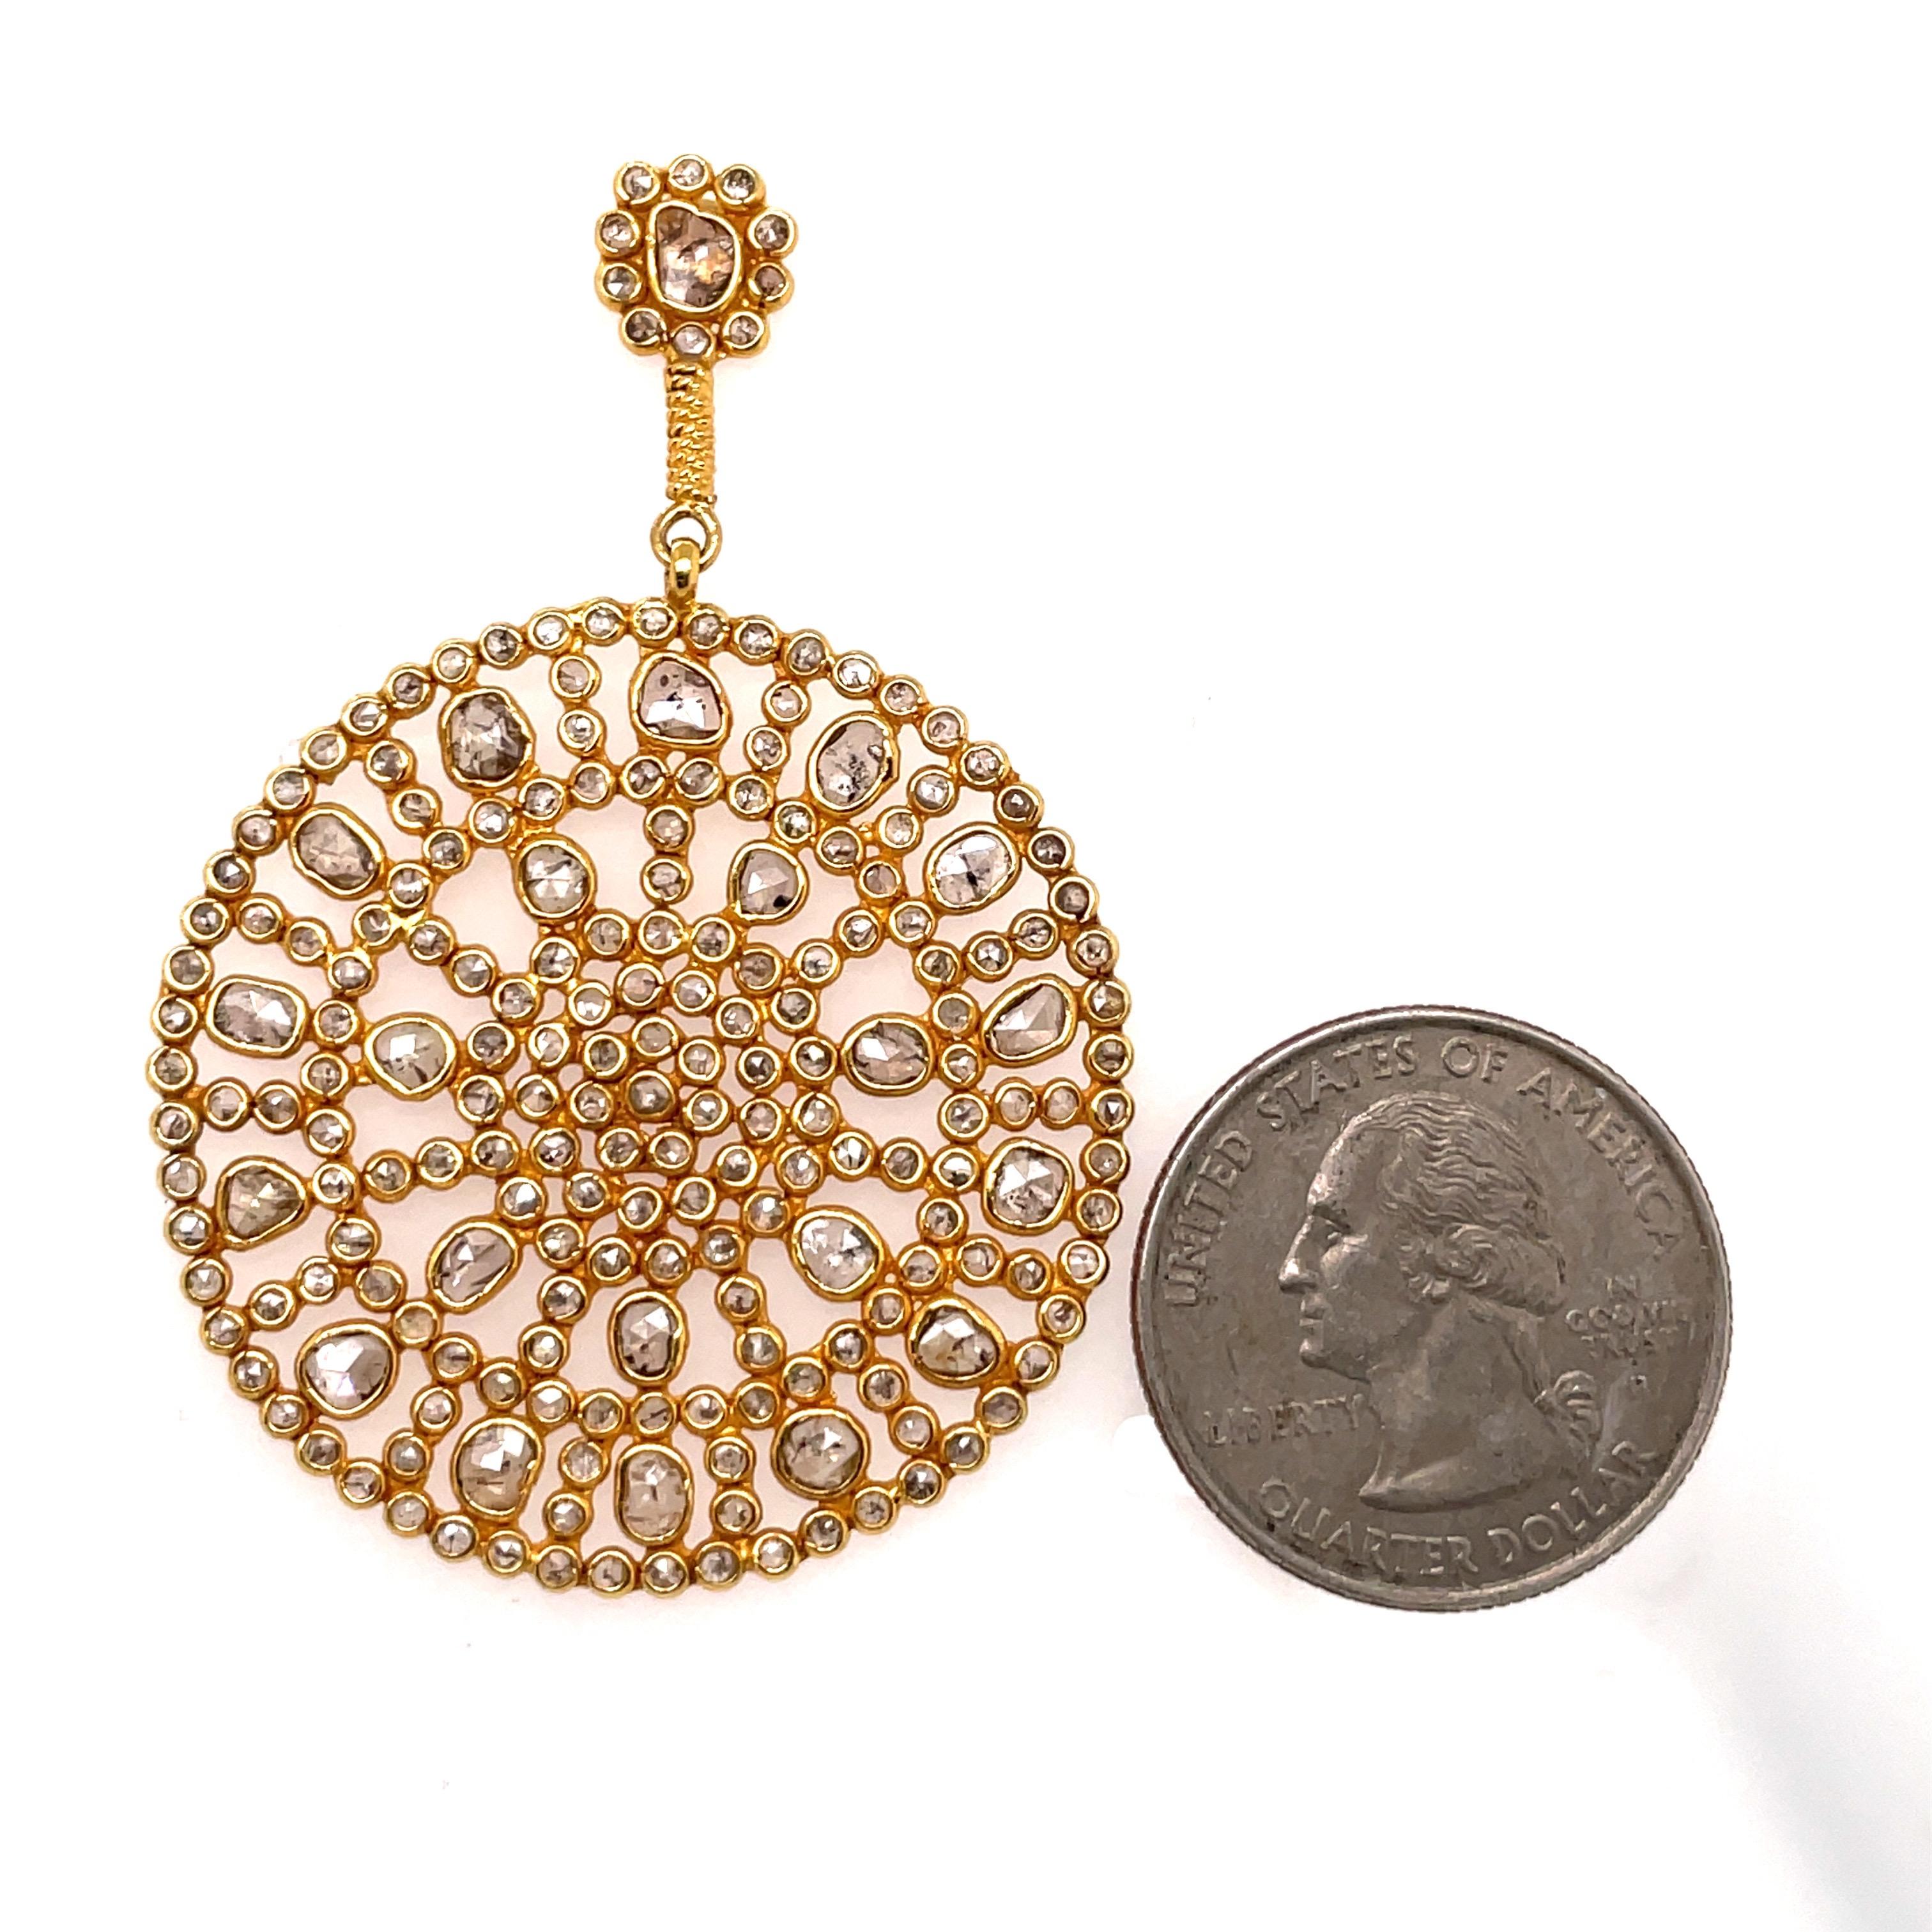 18 Karat yellow gold drop disc earrings featuring numerous sliced diamonds weighing approximately 11 carats.
Very fashionable!  